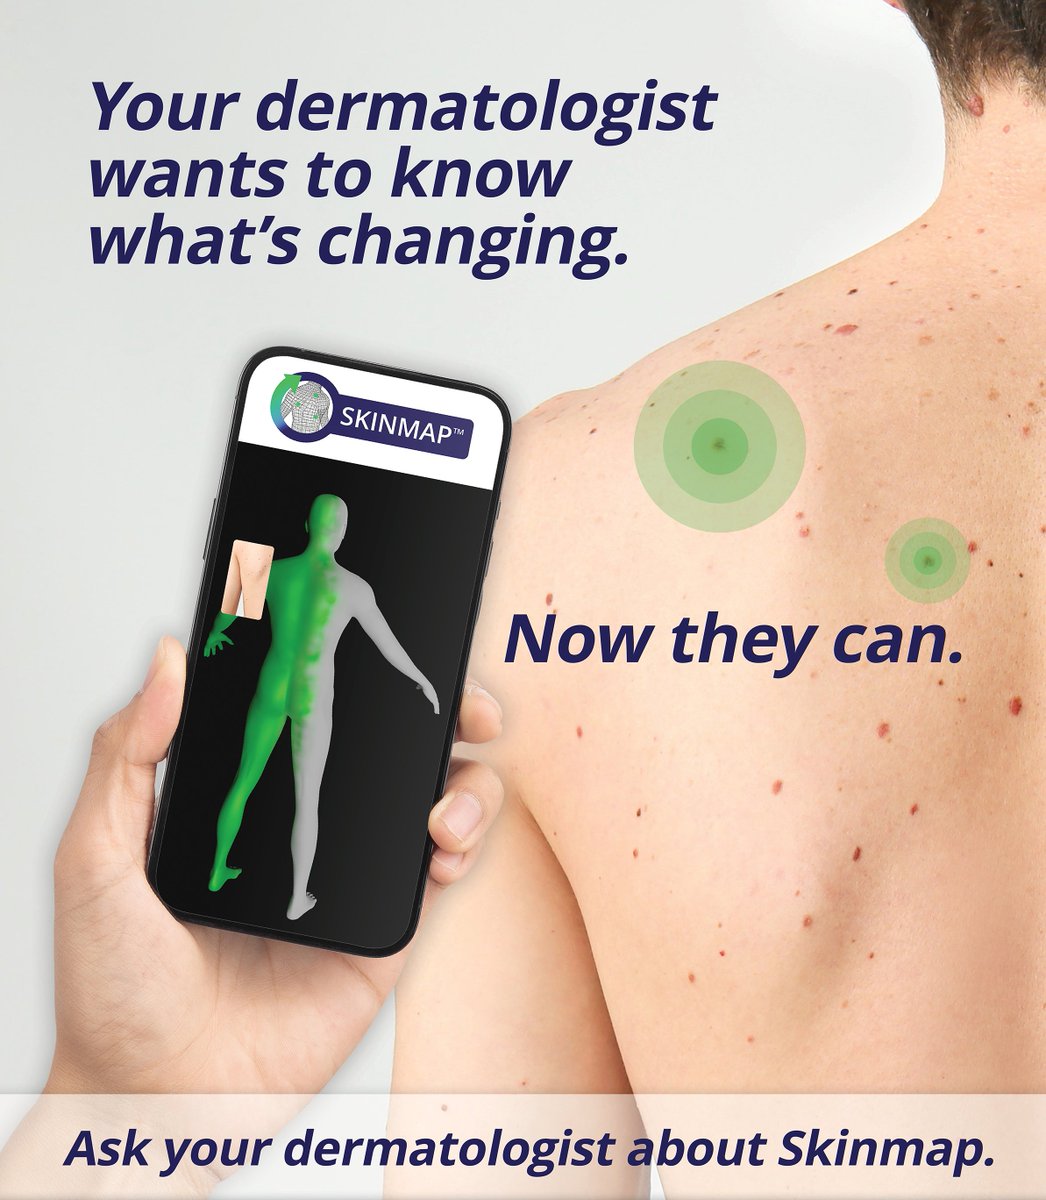 Experience Total Body Photography in 60 seconds with #Skinmap! Complete a Skinmap in one minute to see skin changes - a key prognostic indicator of skin cancer. Learn more about how Skinmap is #DigitizingSkinToSaveLives #ScanIn60Seconds @TriangulateLabs